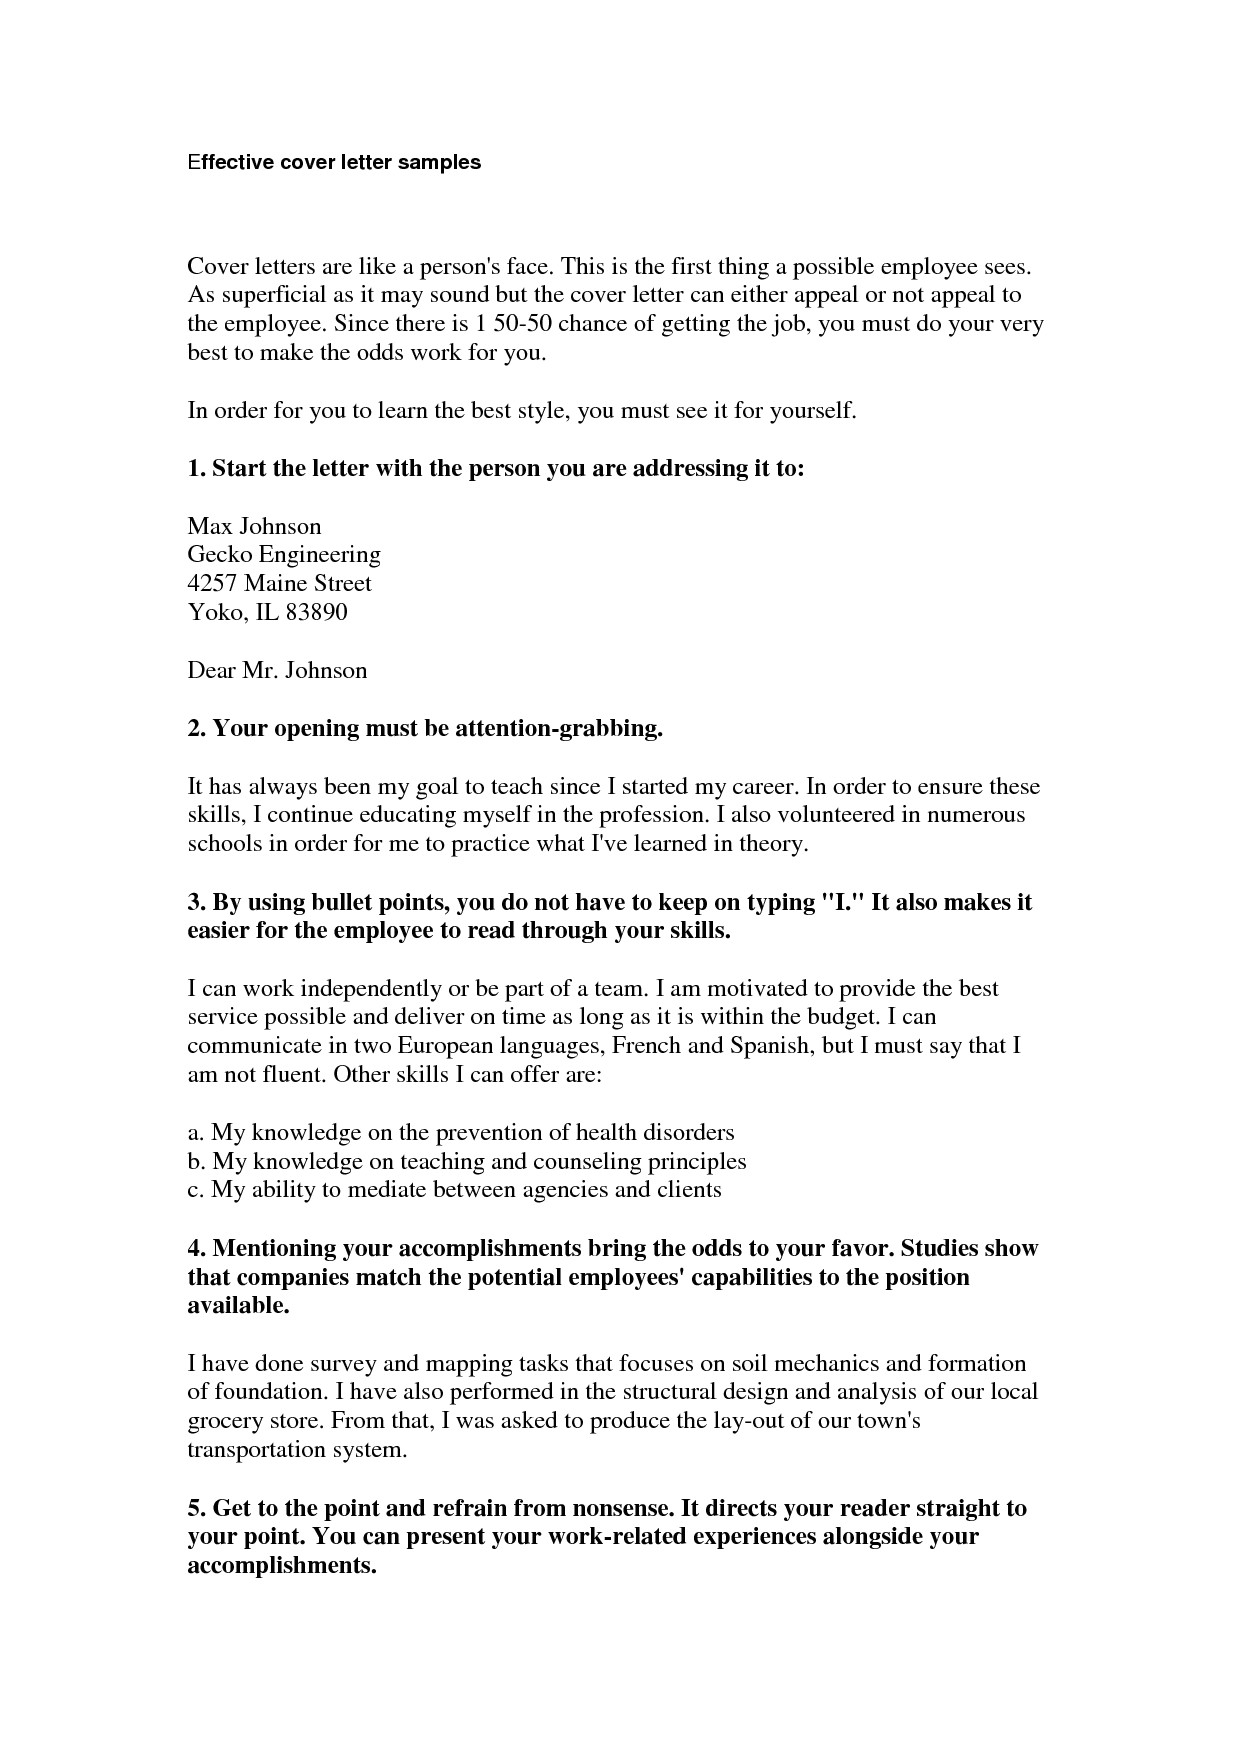 writing an effective cover letter